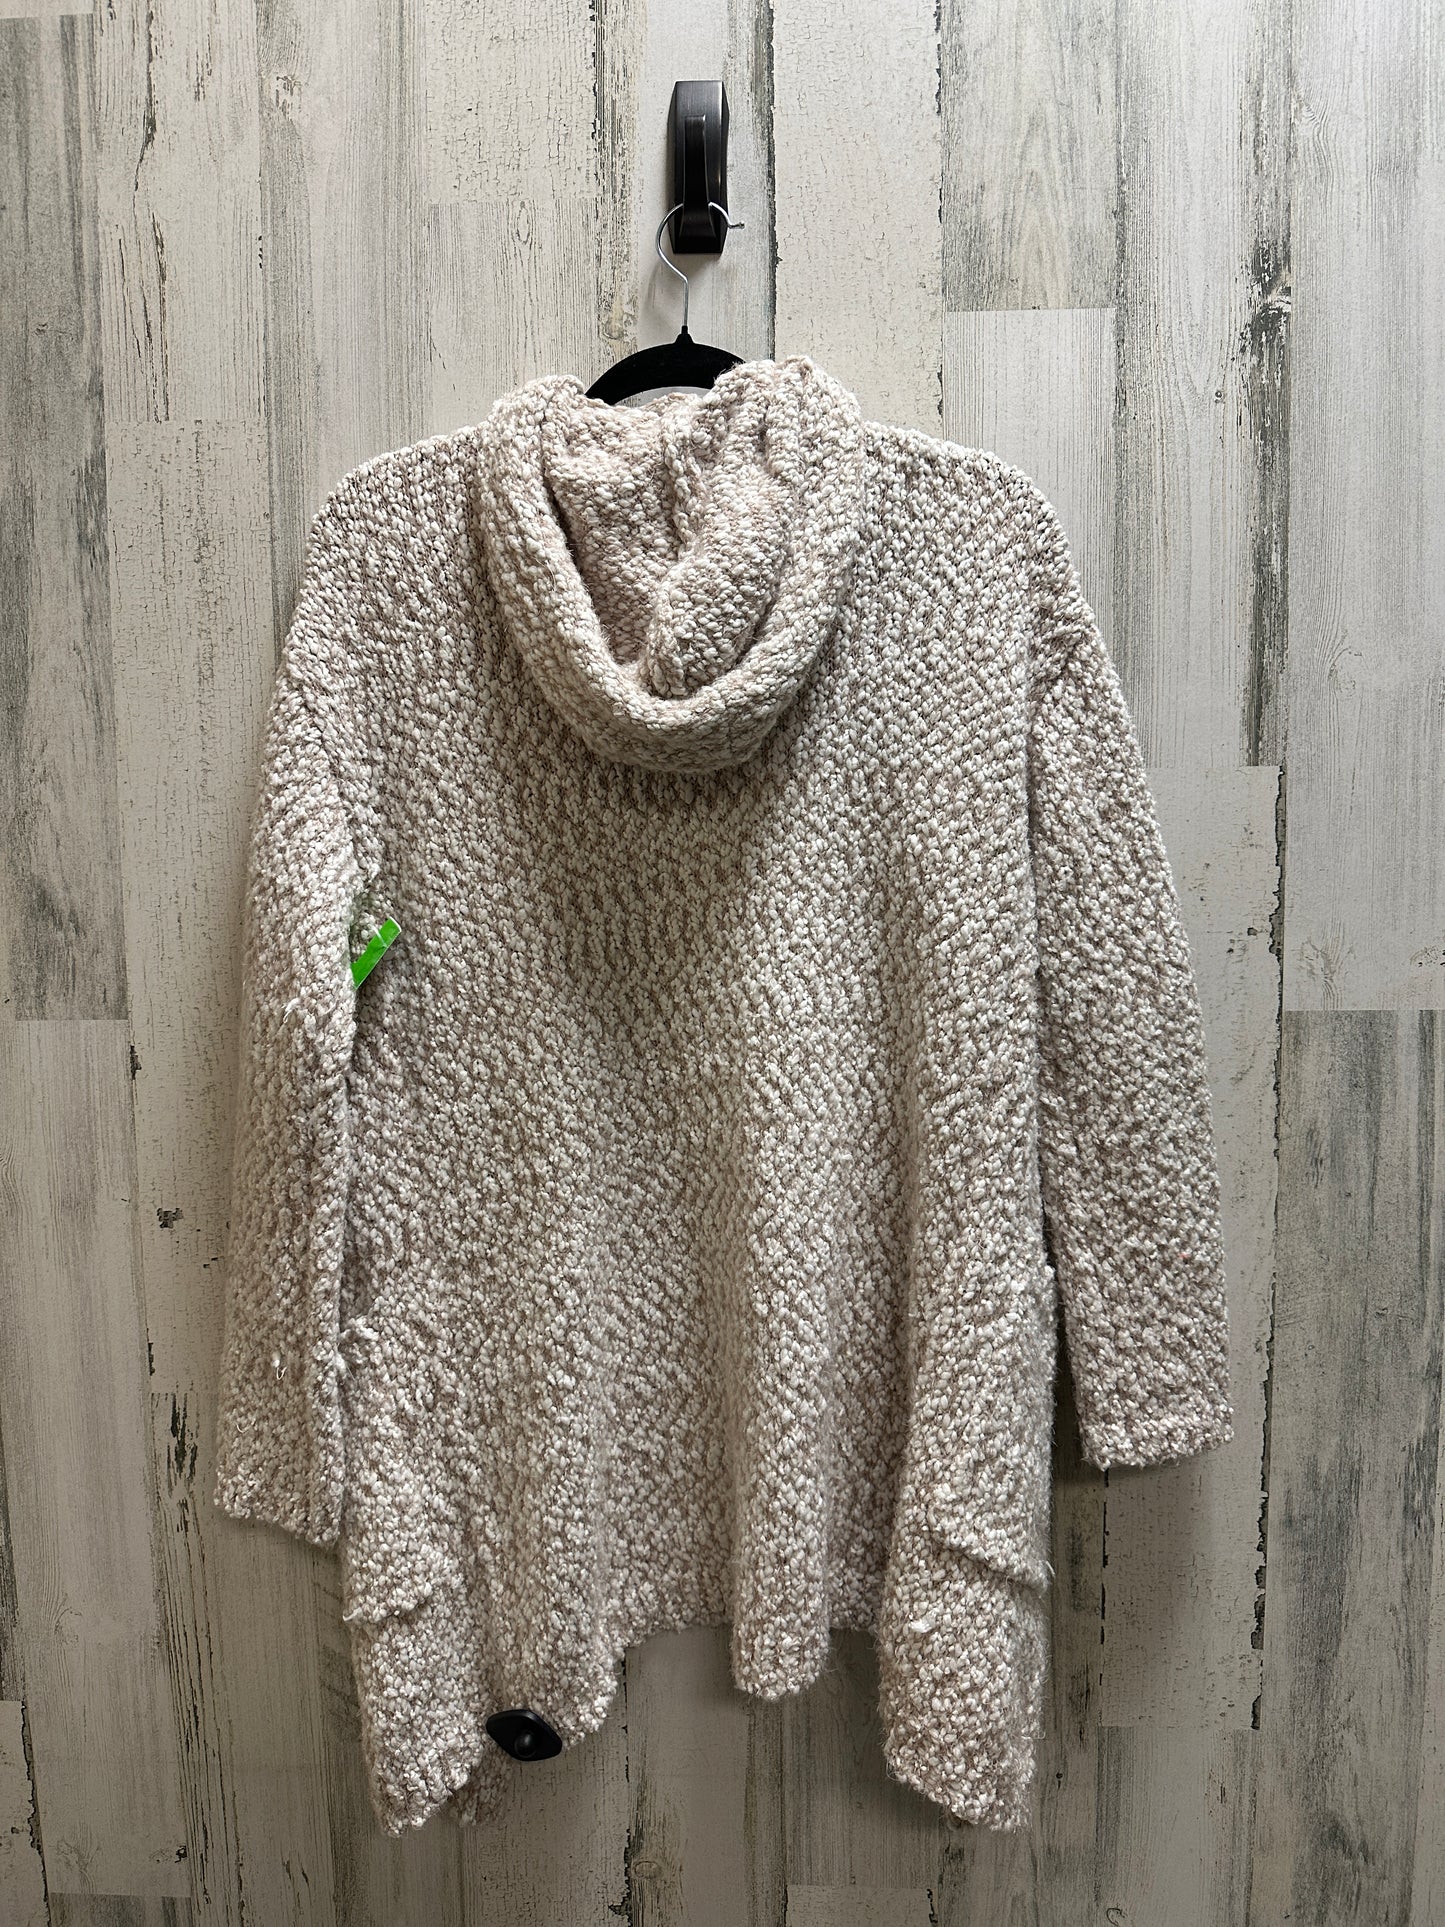 Sweater By Cynthia Rowley  Size: M